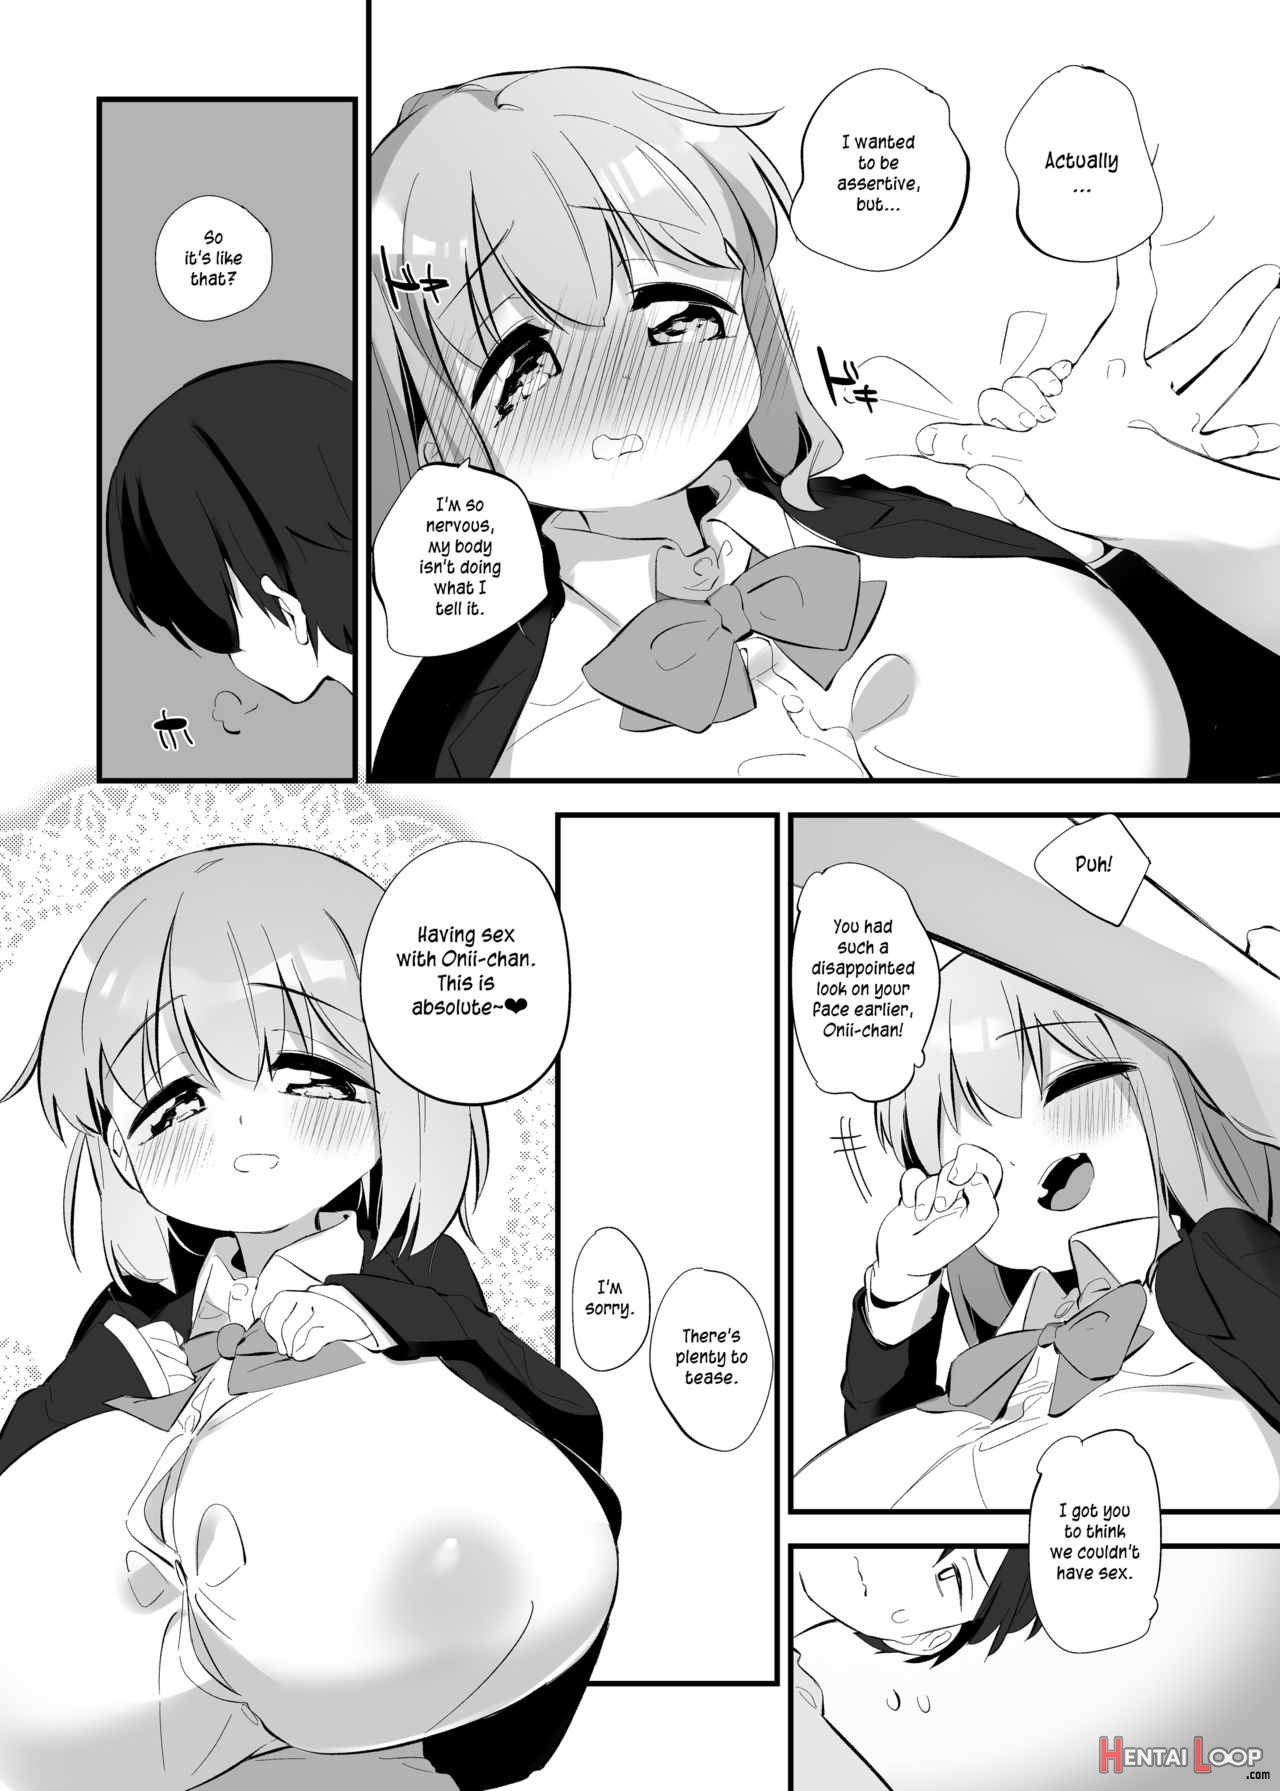 Between Sisters, Are You Happy? 2 page 8